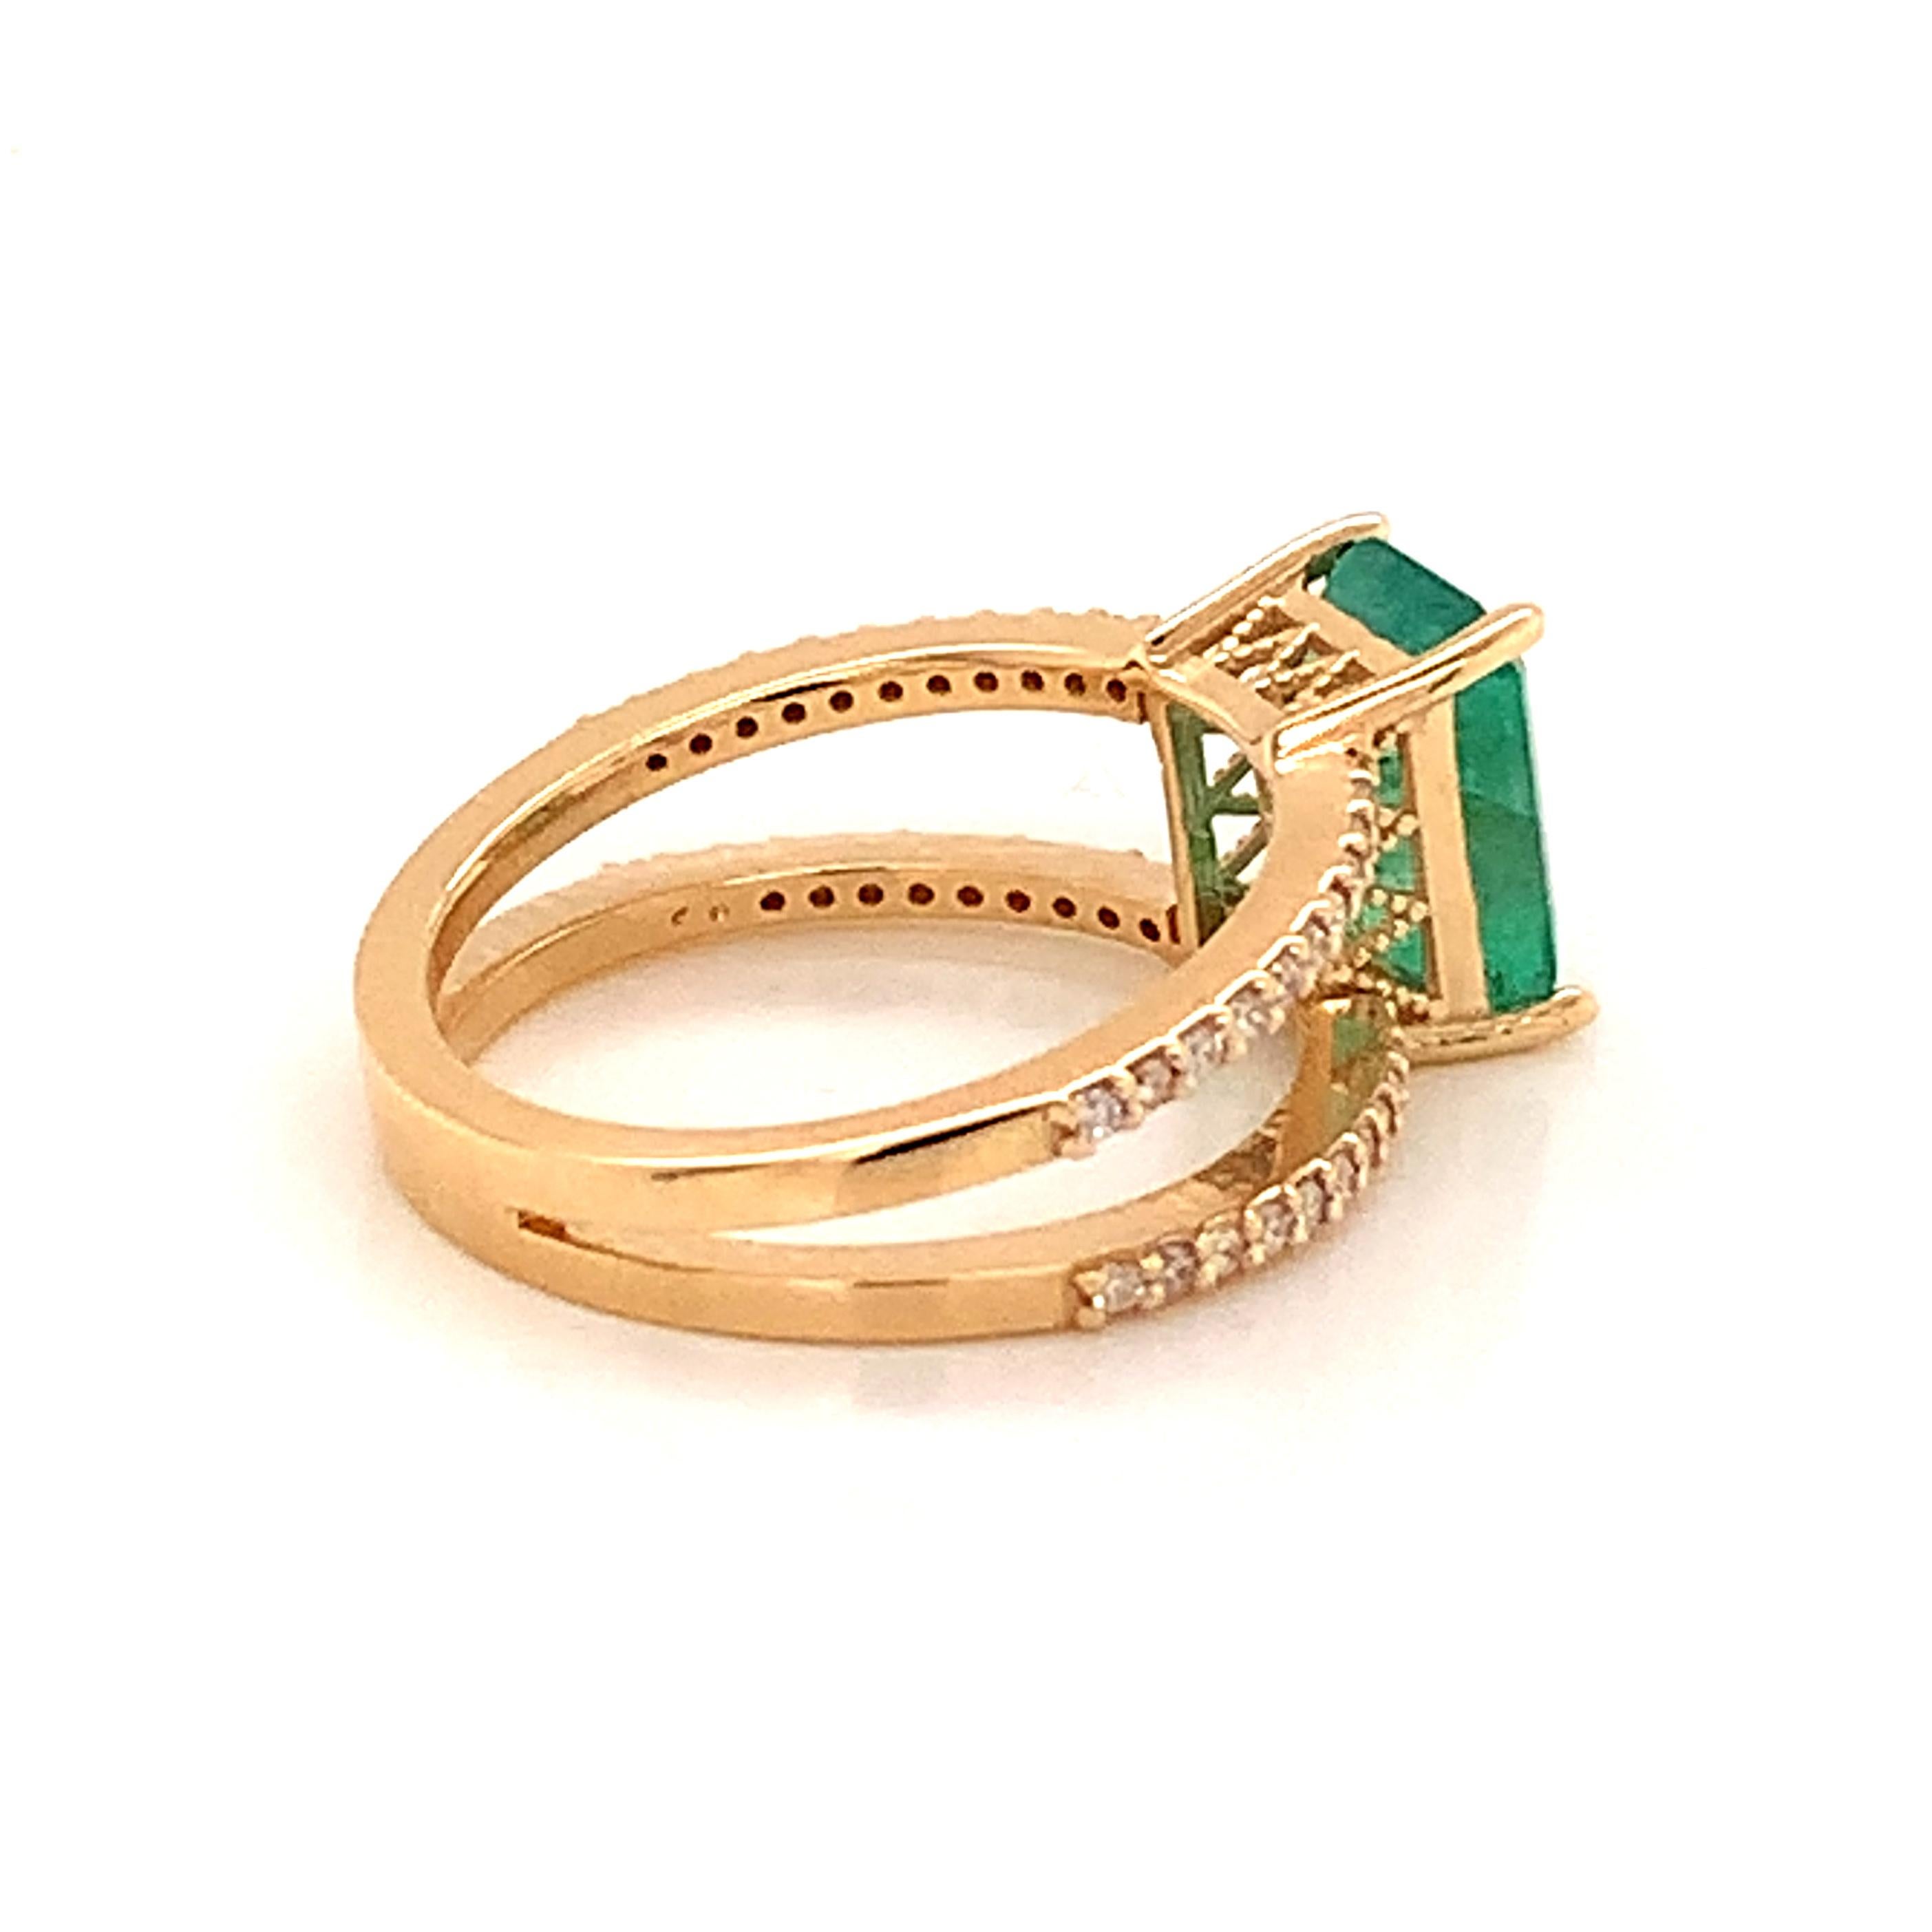 Natural Emerald Diamond Ring 14k Gold 2.32 TCW Certified For Sale 4